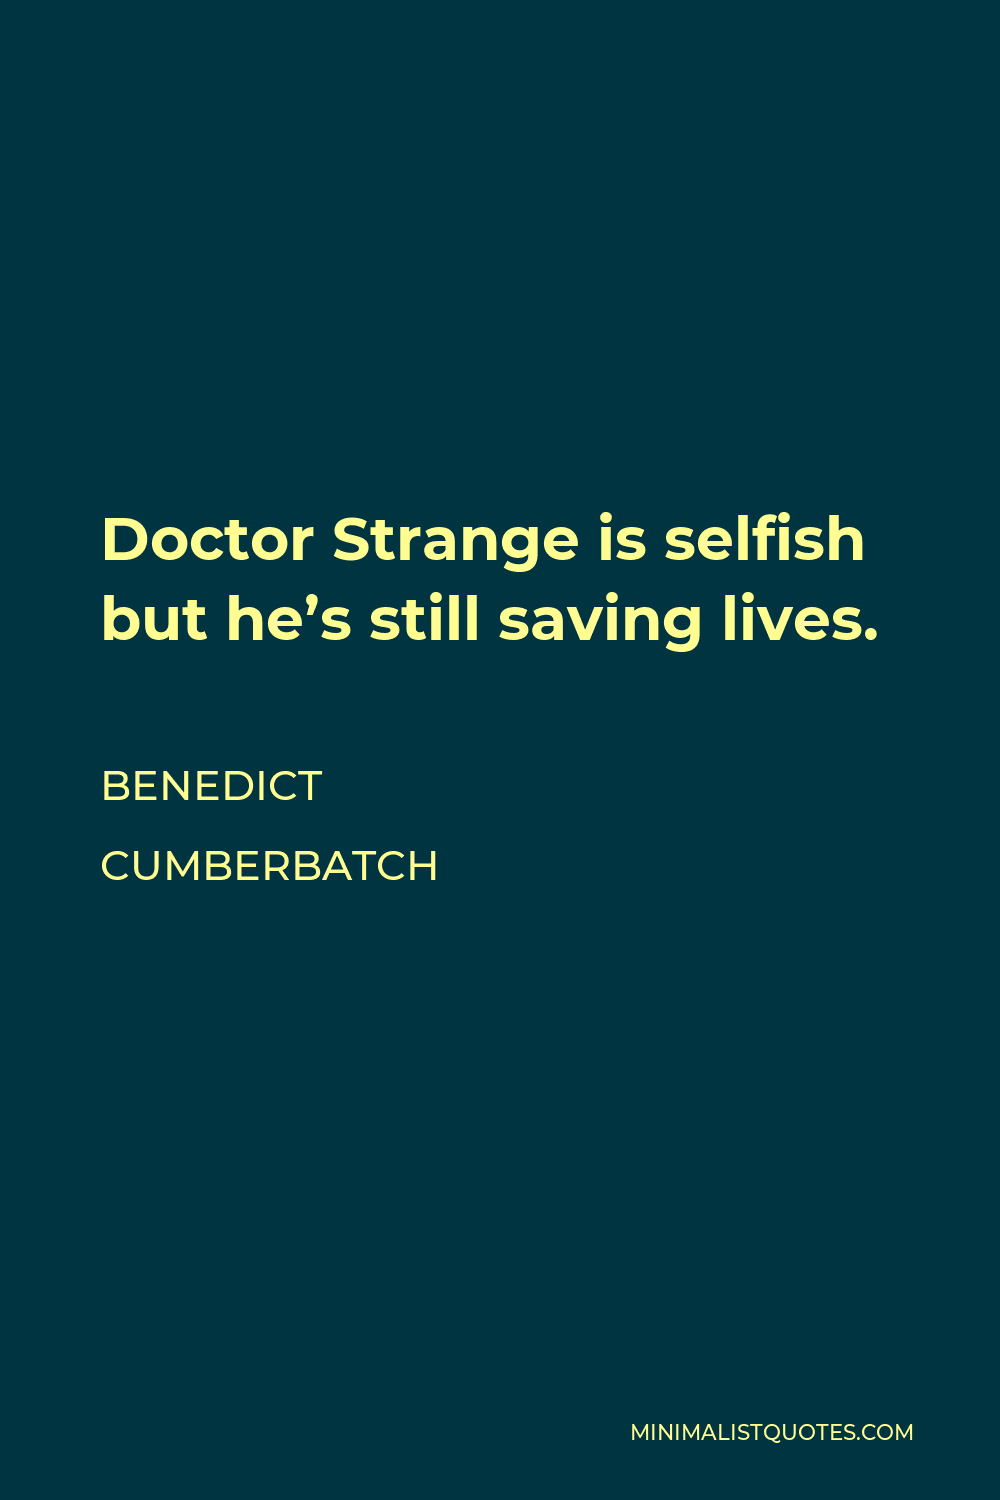 Benedict Cumberbatch Quote - Doctor Strange is selfish but he’s still saving lives.